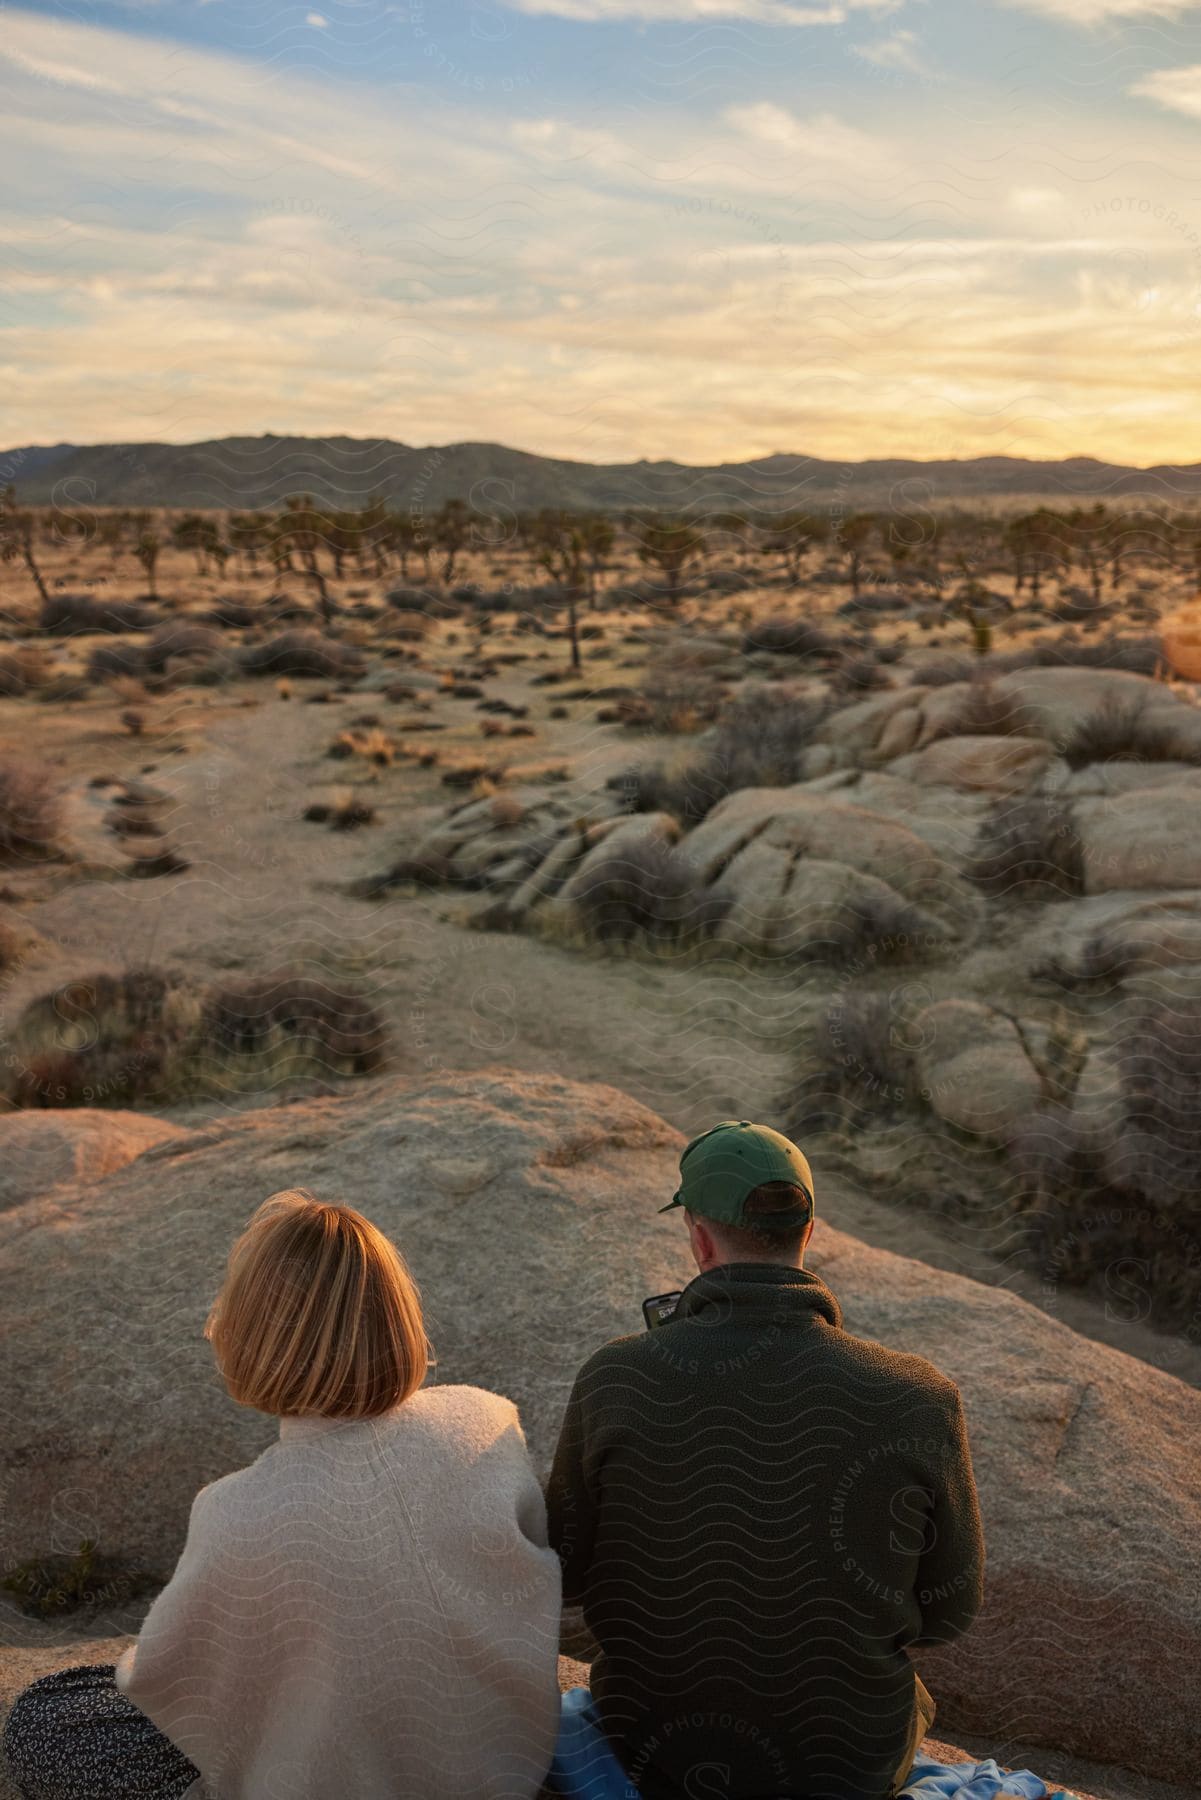 A young couple sits atop a rock, enjoying a romantic getaway in the valley as the sun sets. Rocks and trees surround them in the dry landscape.